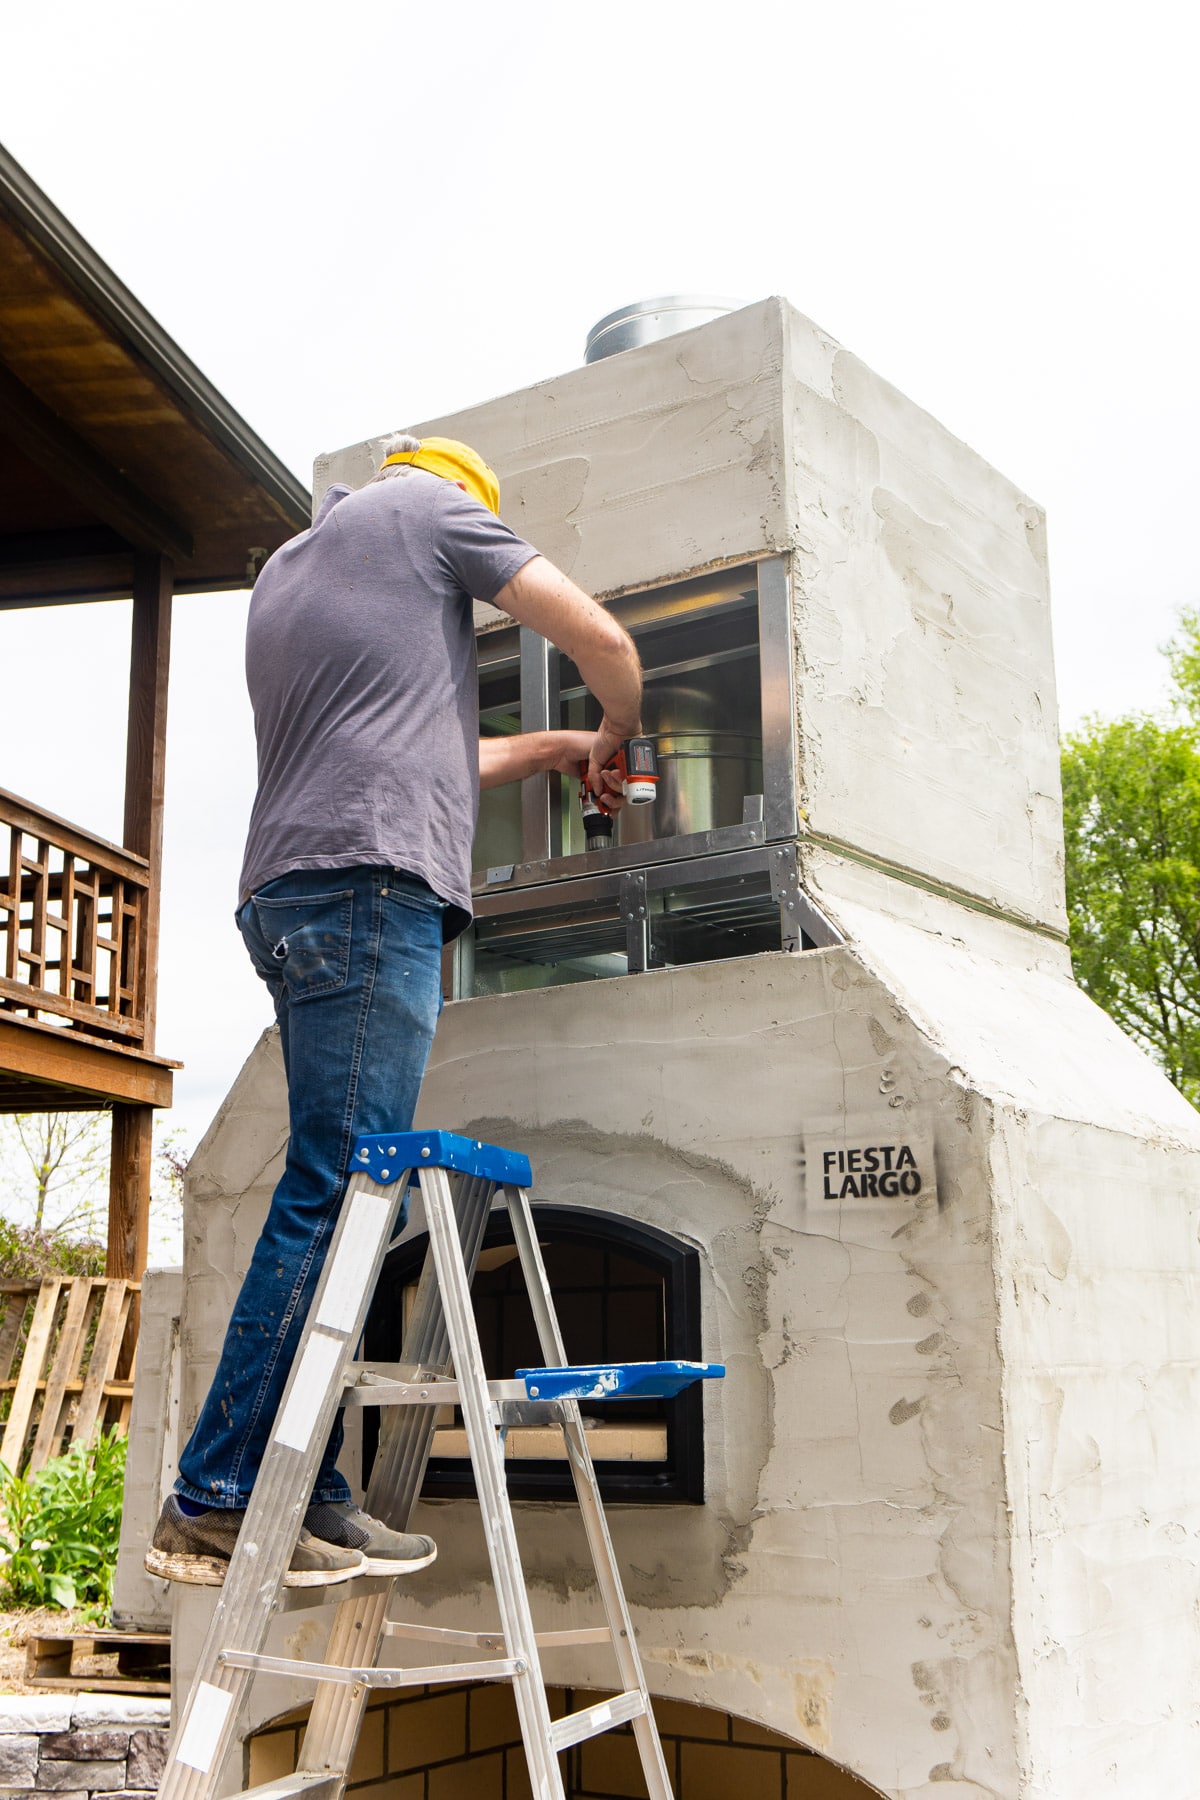 Adding chimney to an outdoor brick oven